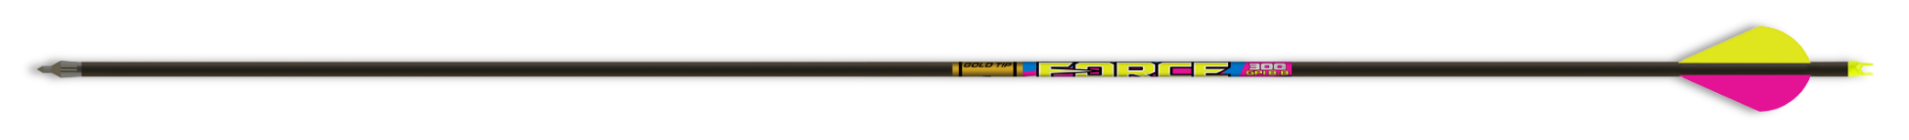 new bowhunting accessories, Gold Tip arrow